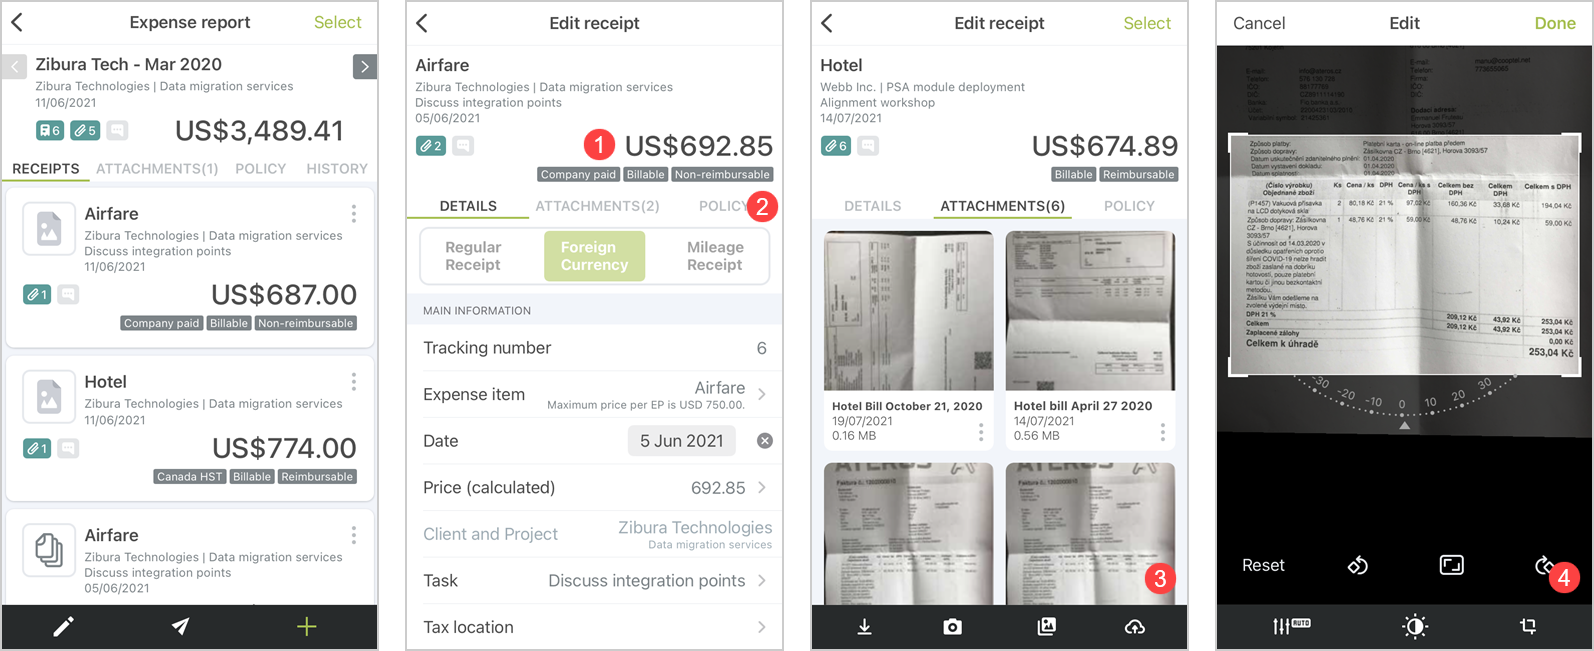 Expense report screen, Receipt screen, Attachments tab and image editing screens in OpenAir Mobile.